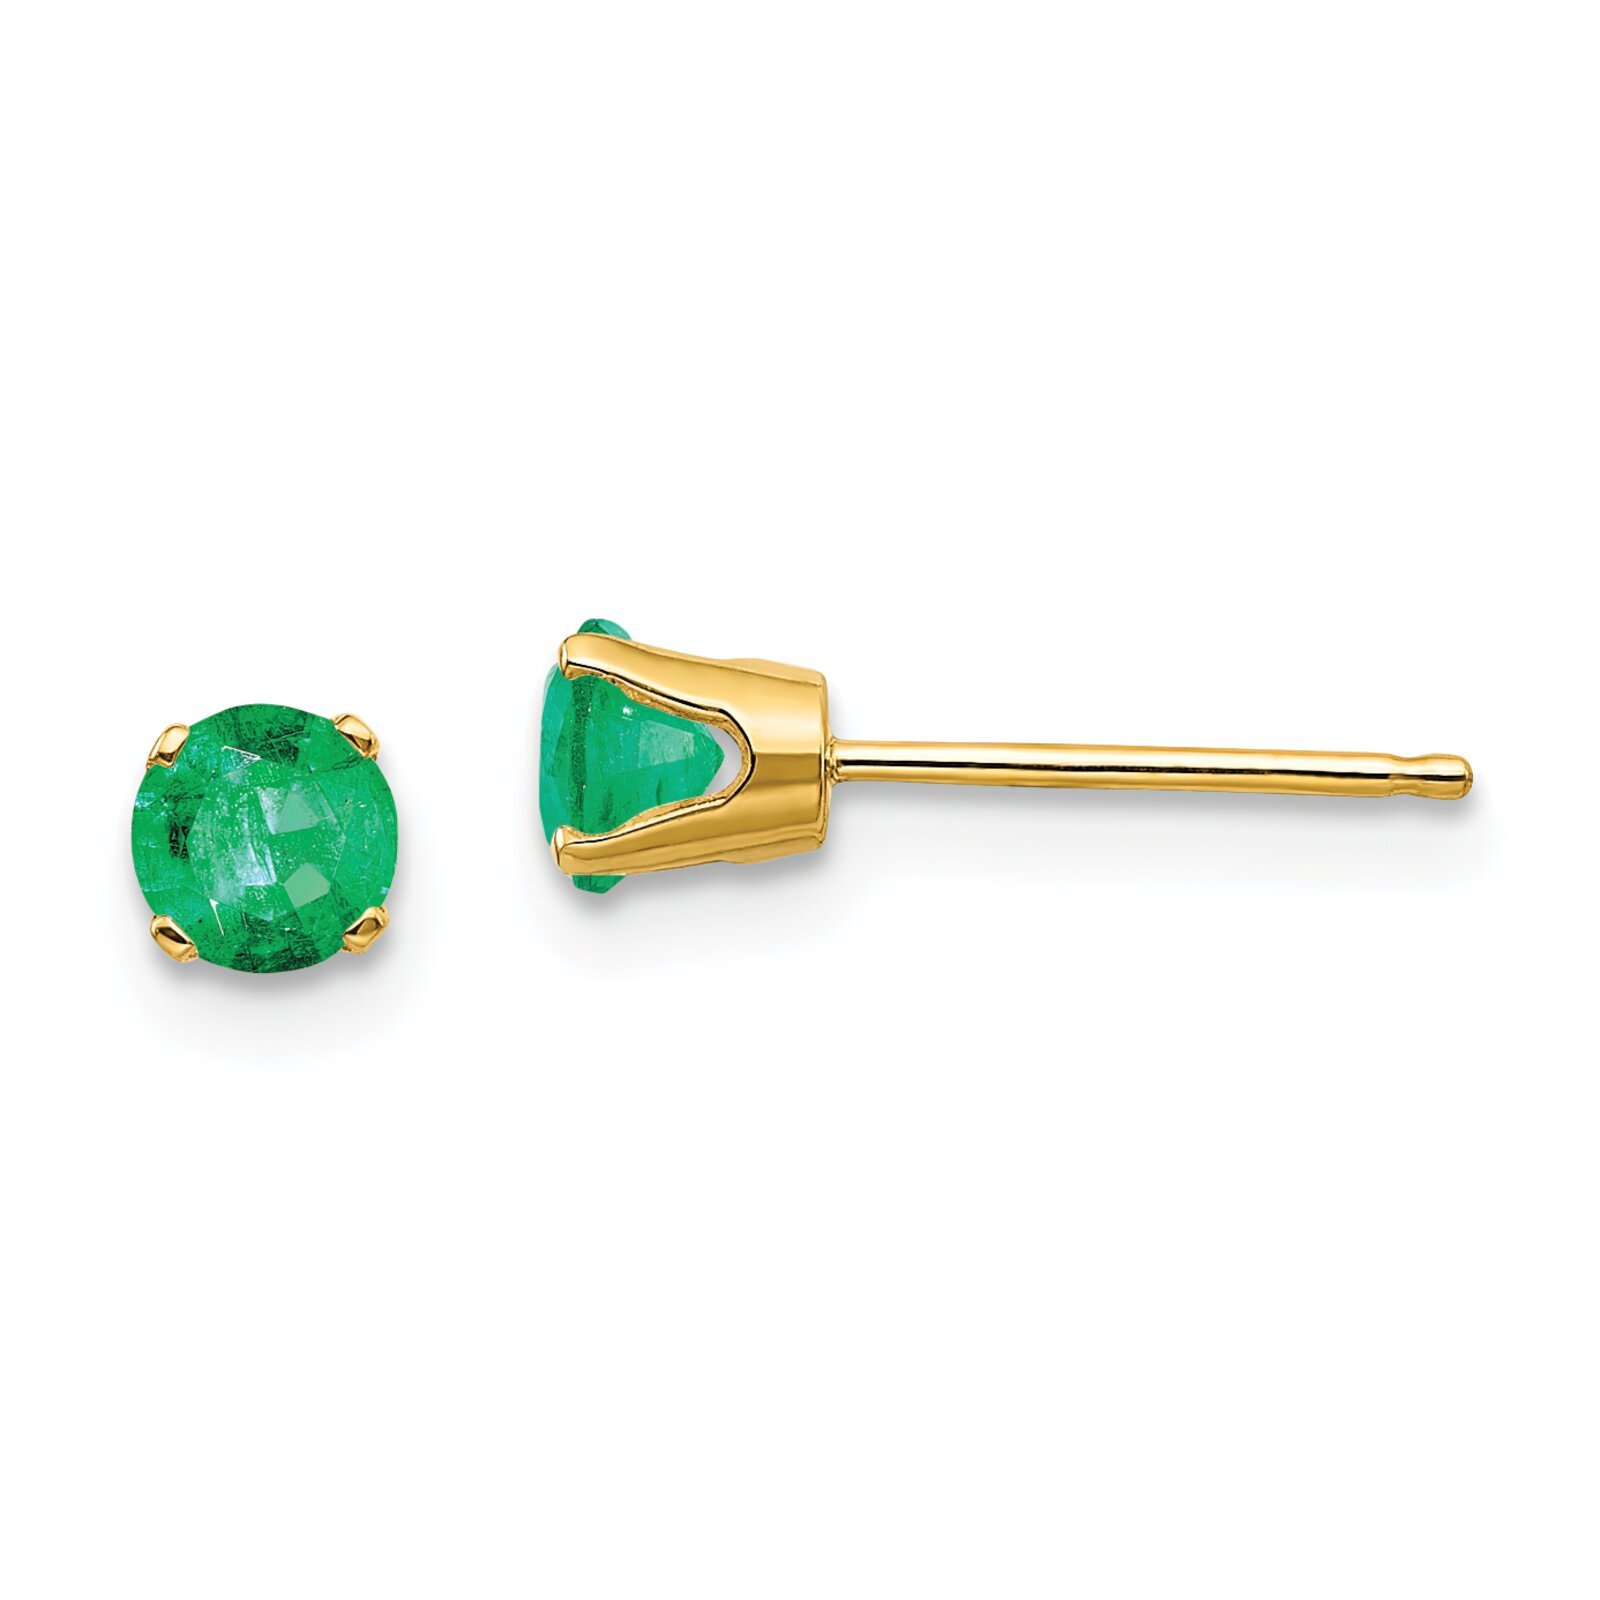 Primary image for 14K Gold May Emerald Stud Earrings Jewelry 4mm 4mm x 4mm